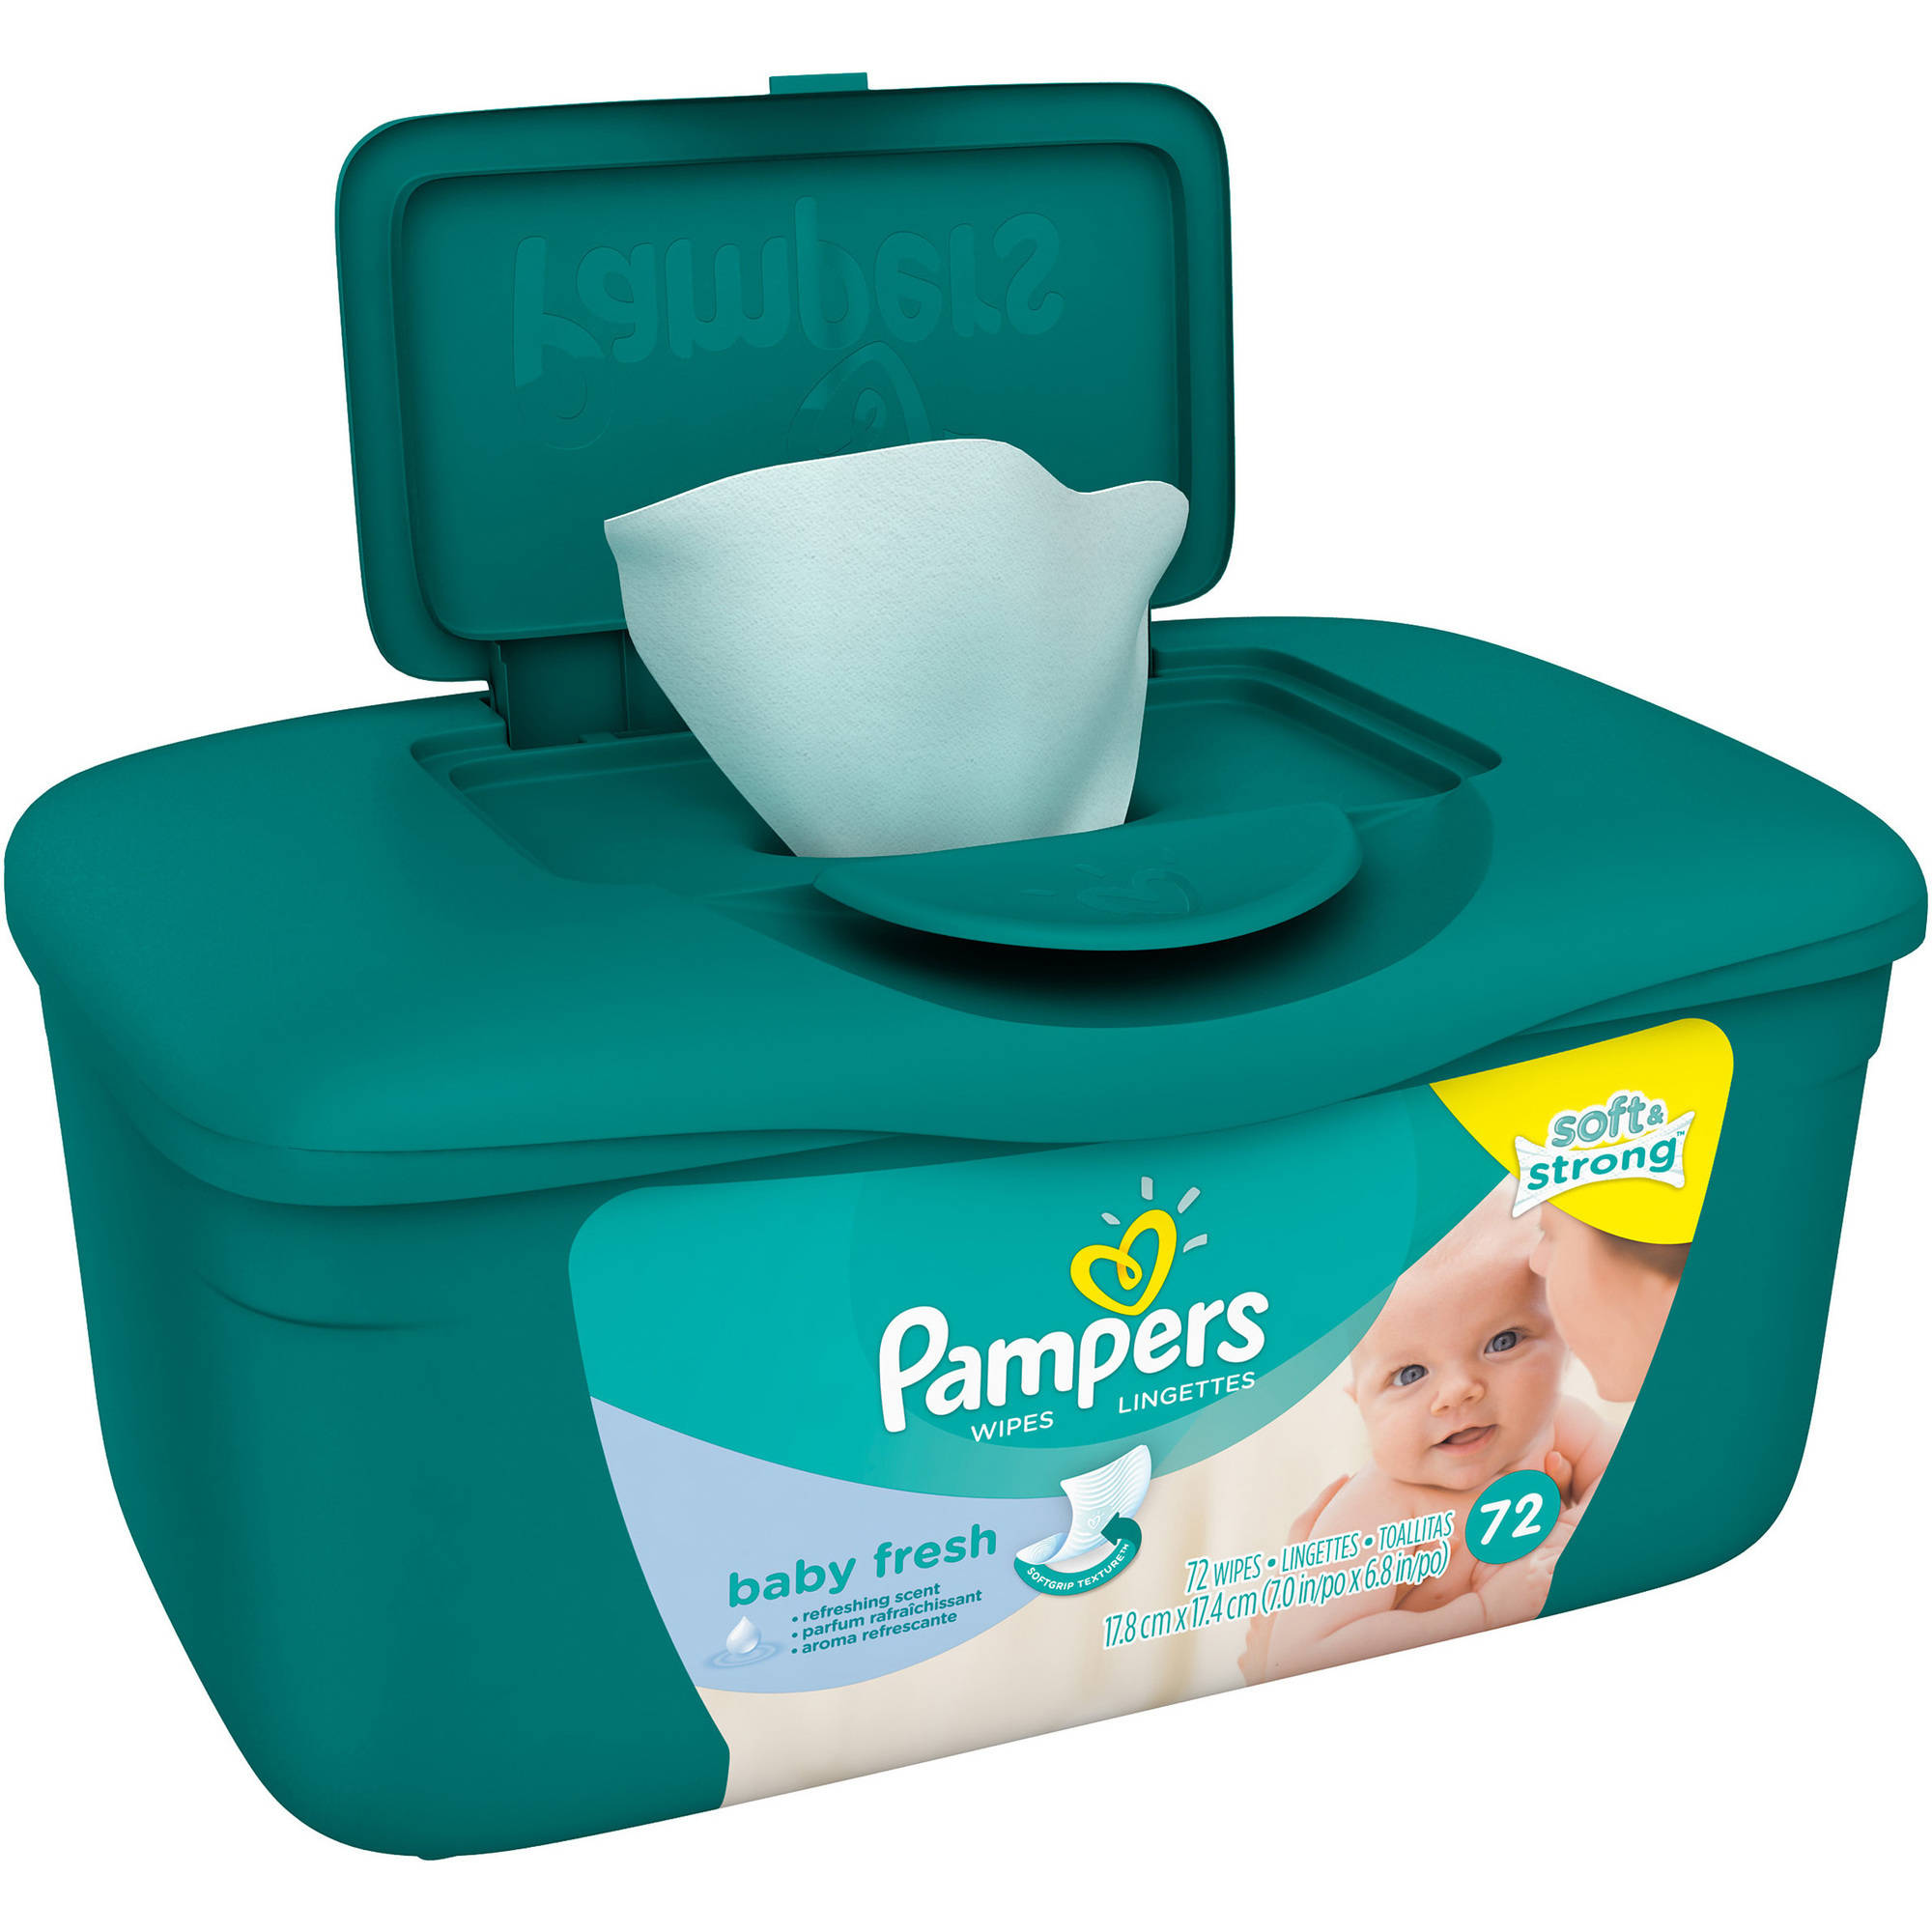 Pampers Baby Wipes, Baby Fresh 1 Pack, 72 Total Wipes - image 1 of 5